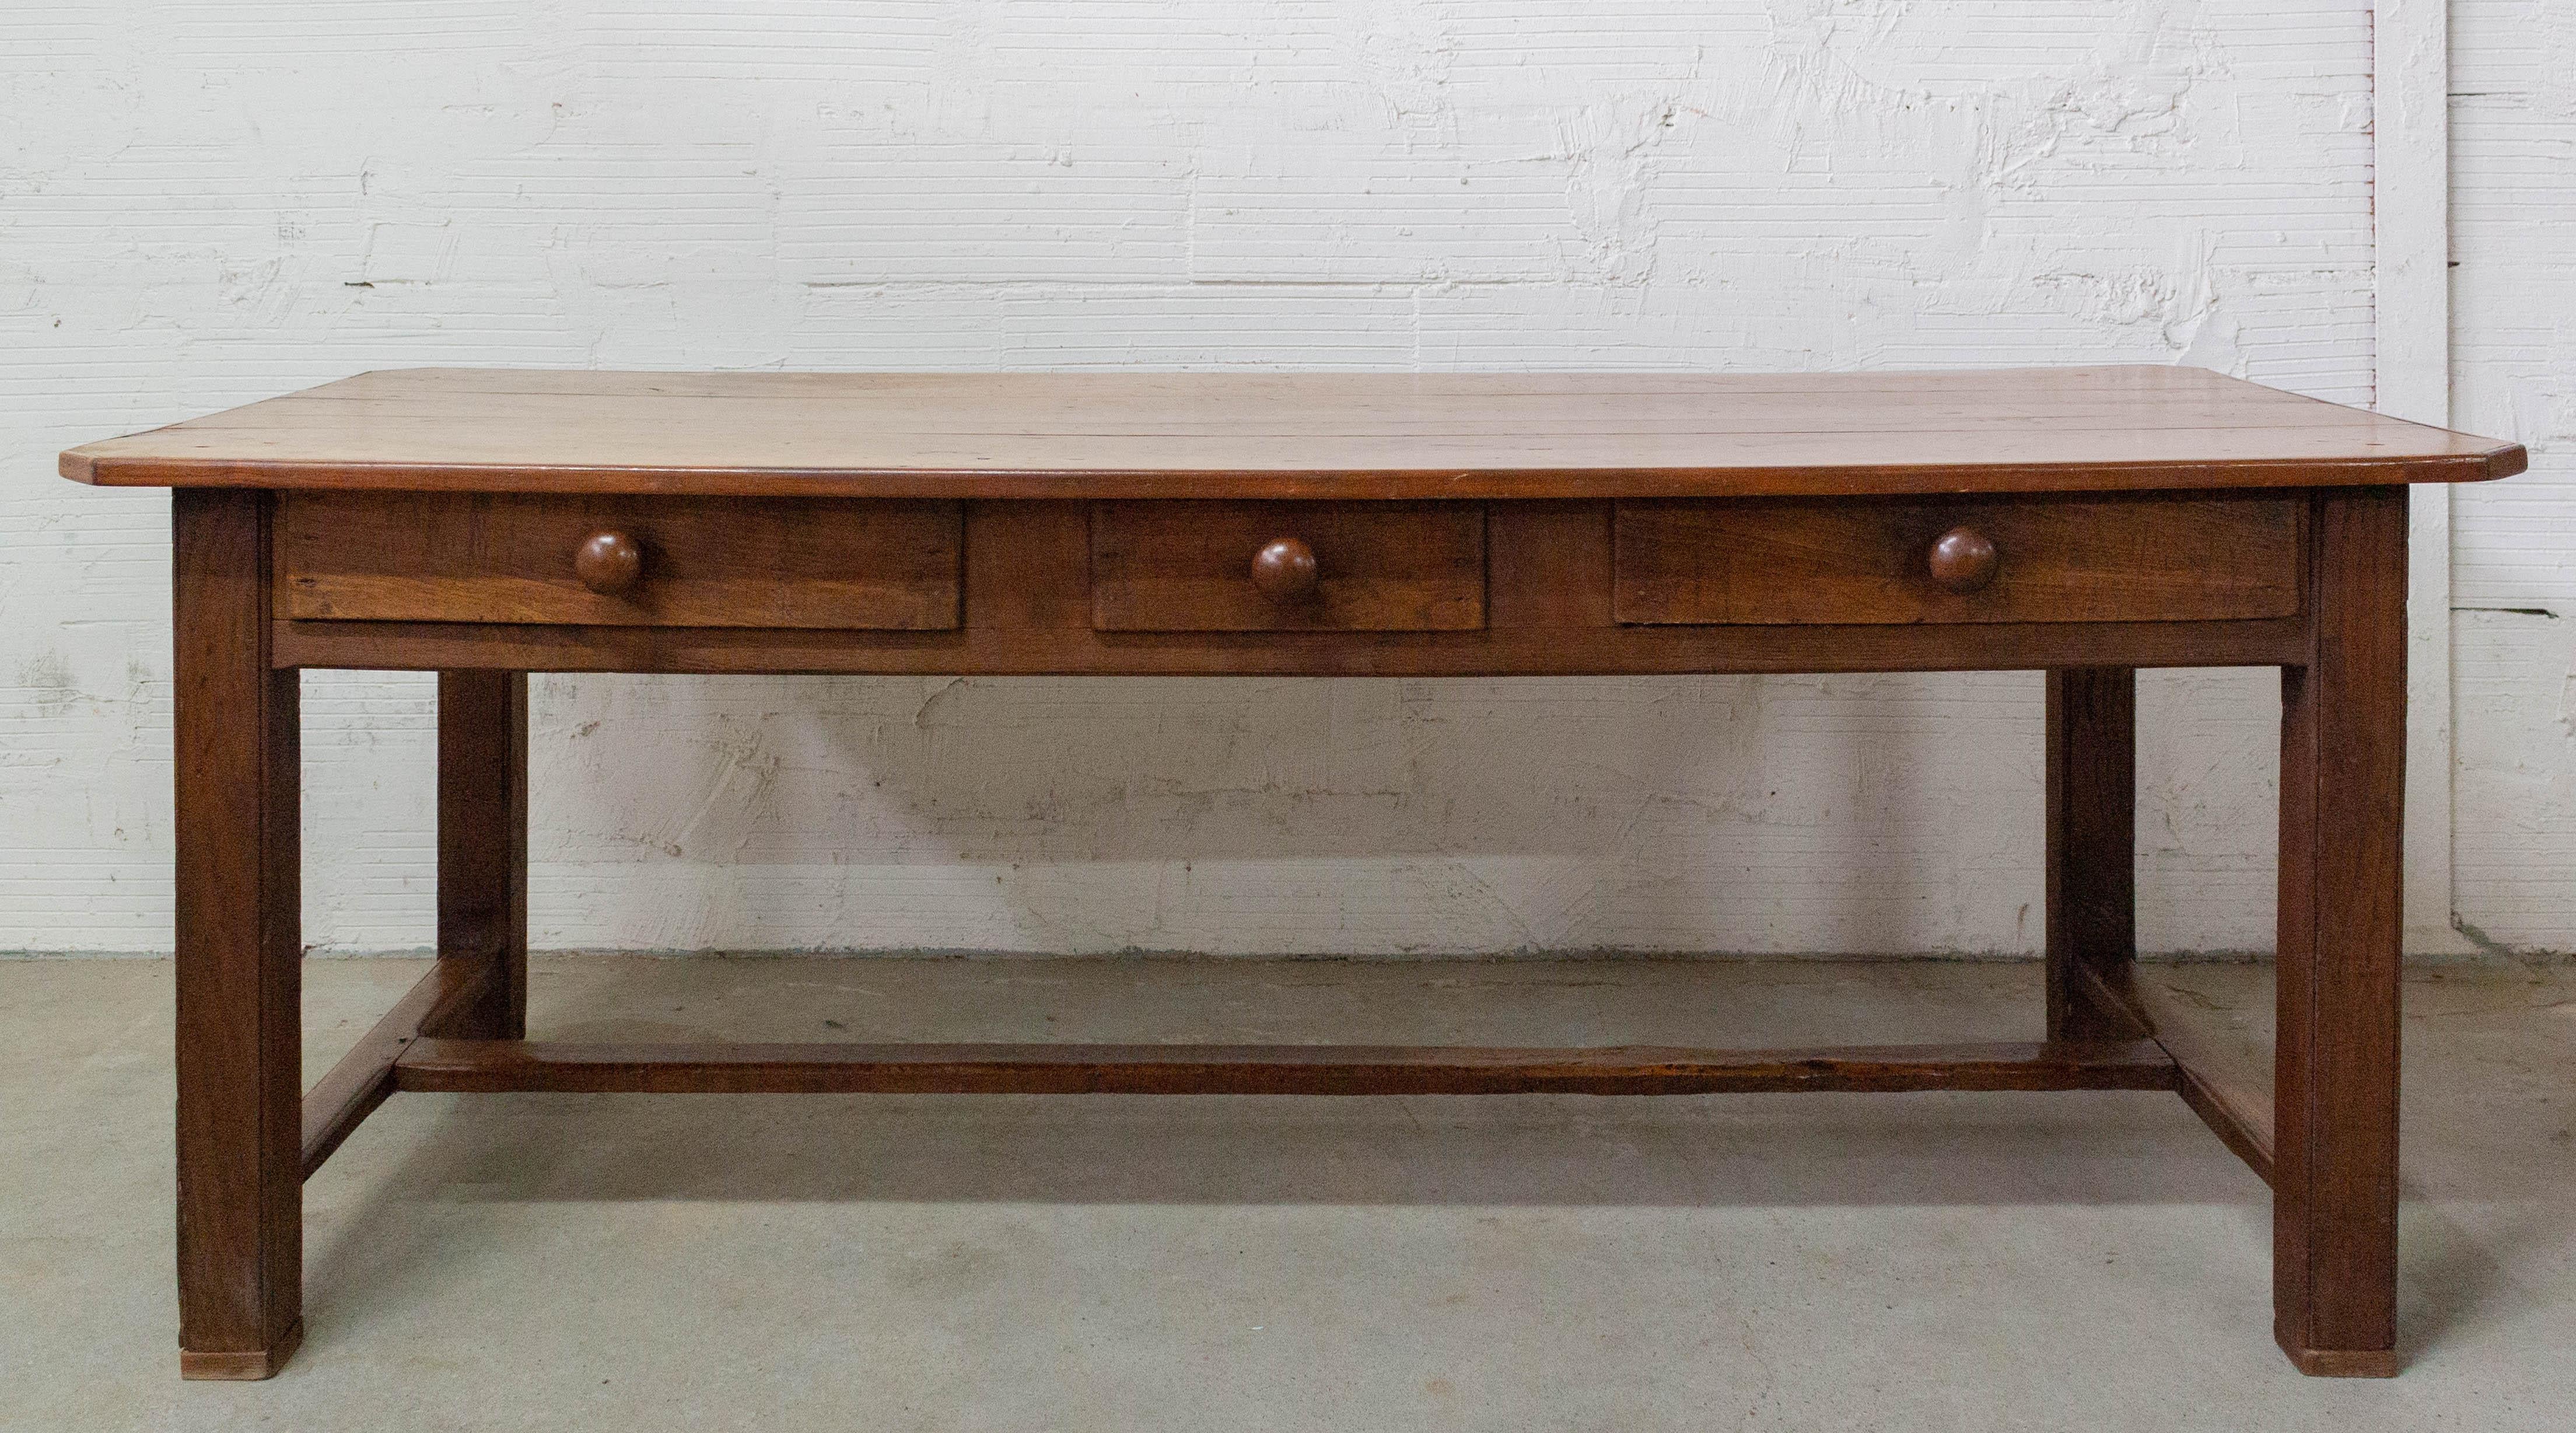 French Provincial French Refectory Table Provincial Oak and Poplar Server Dining Table Late 19th C